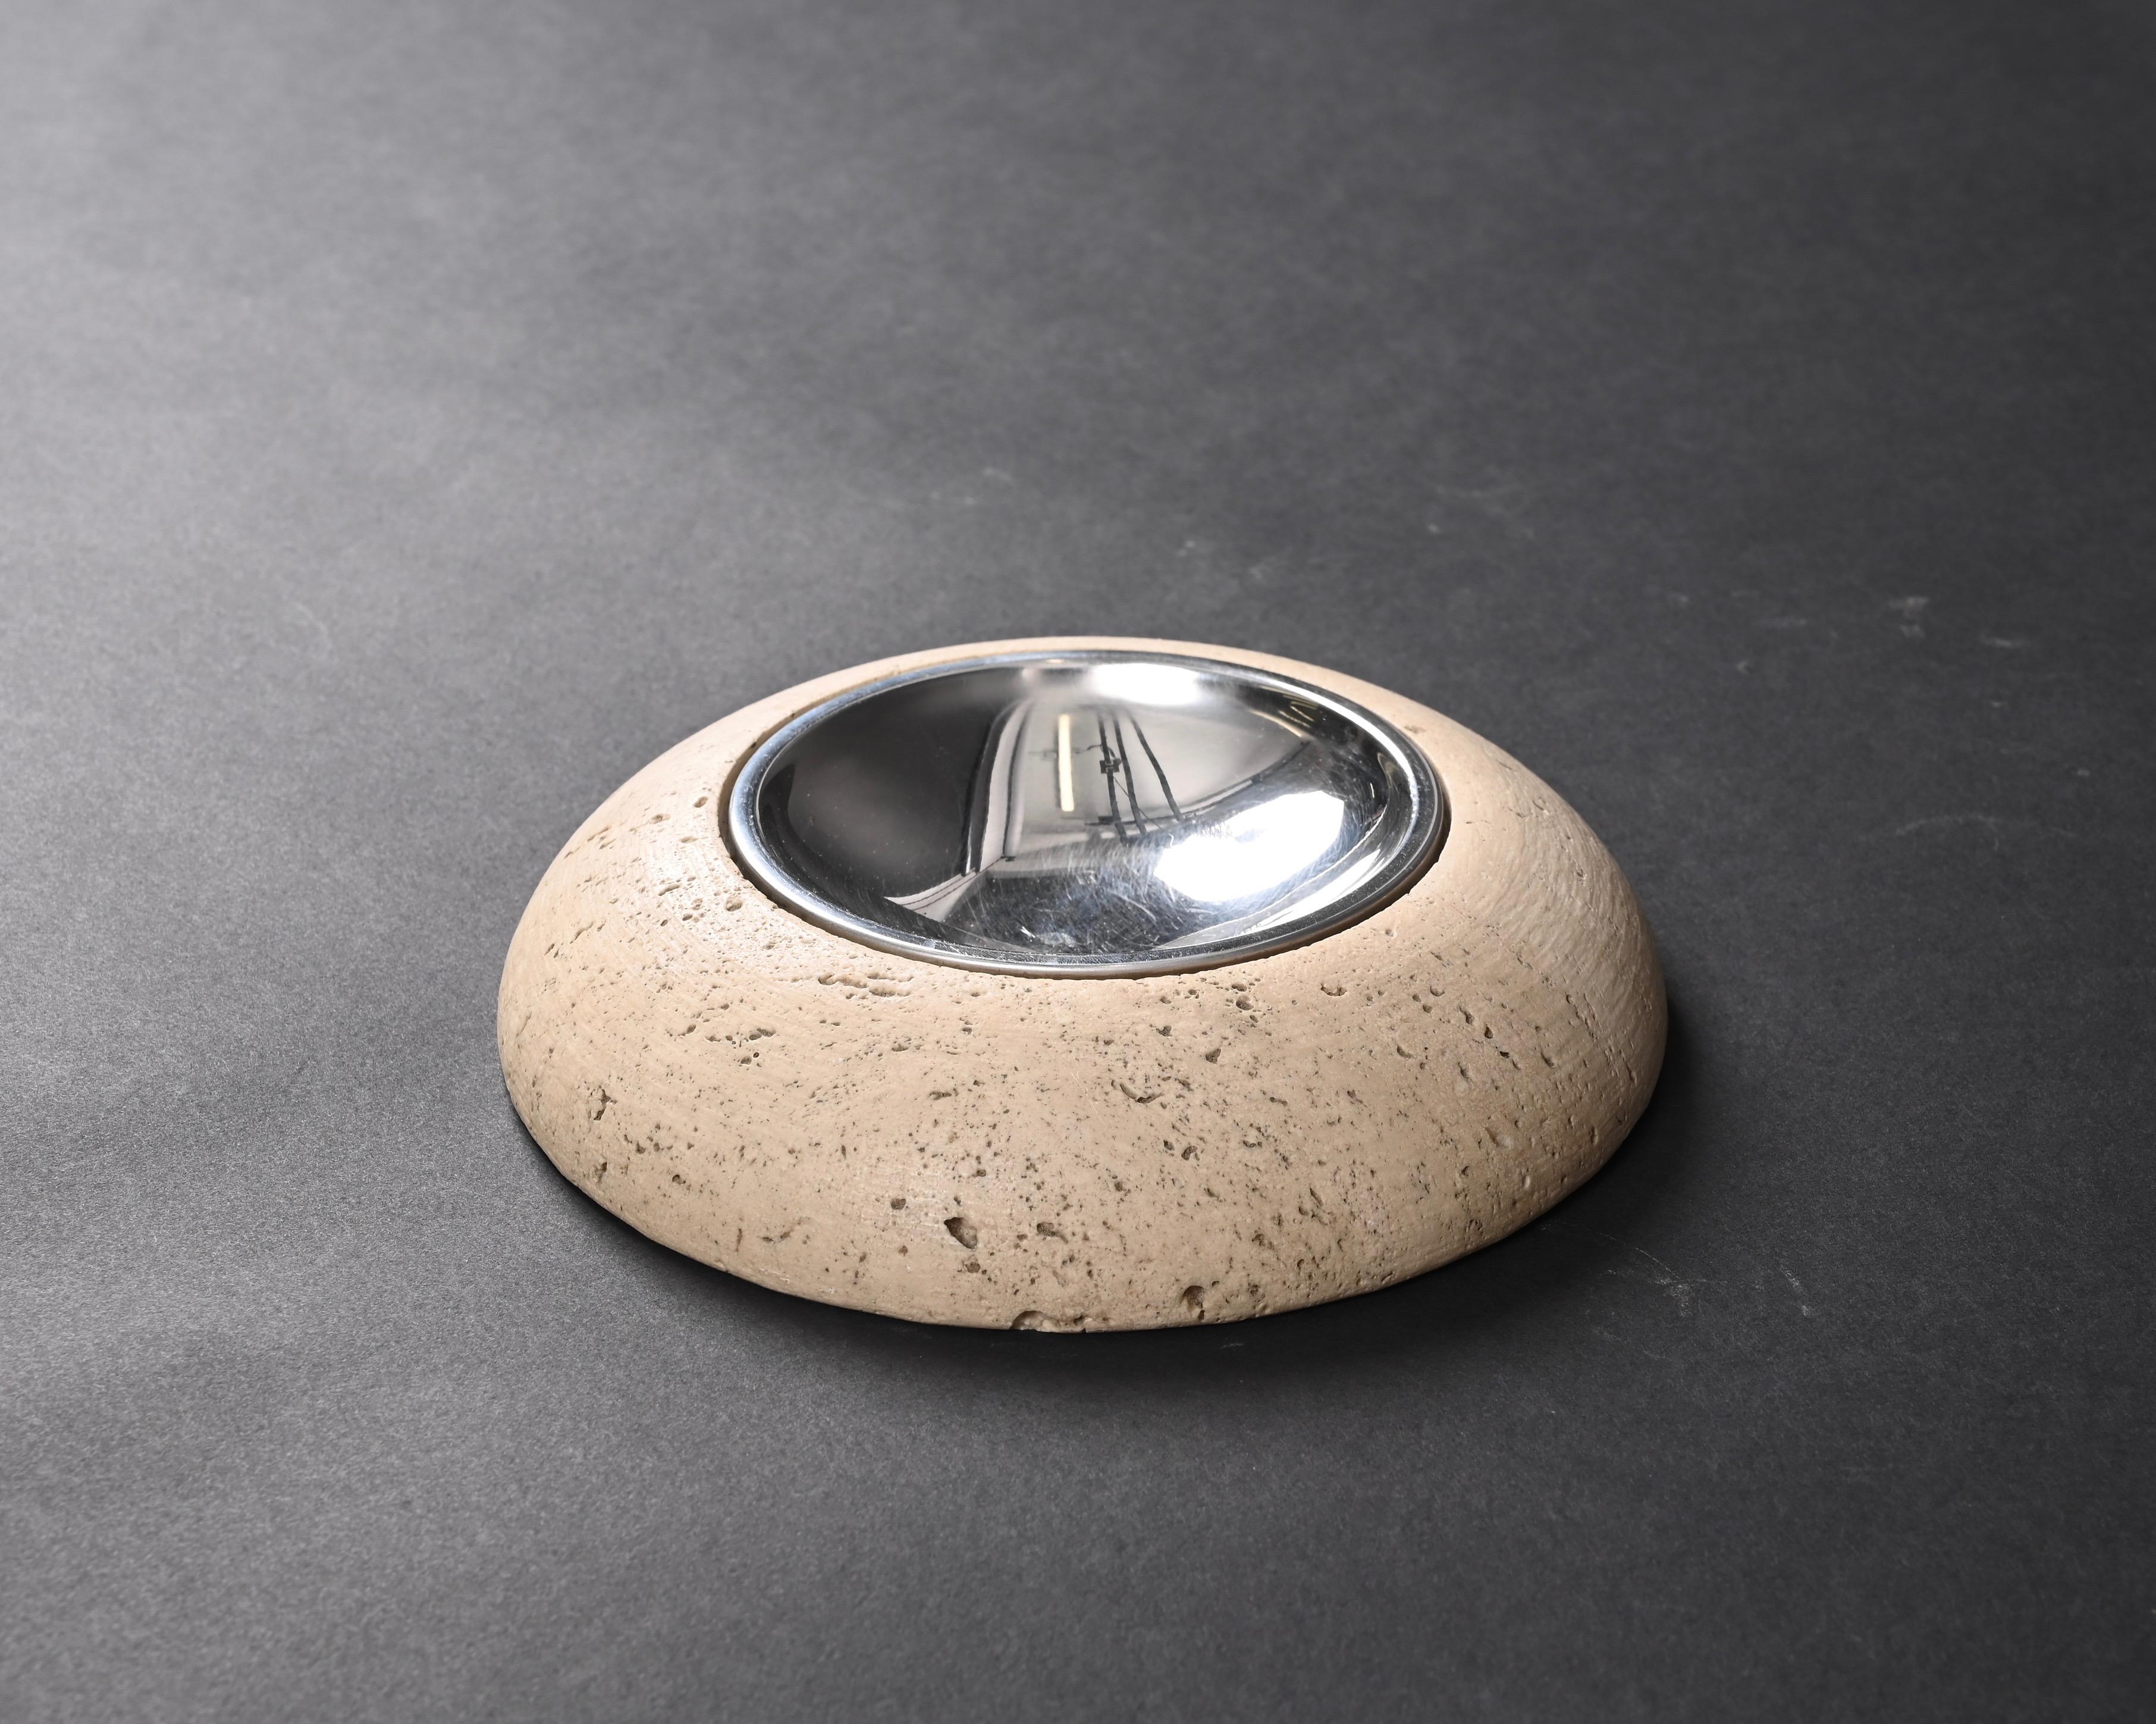 Italian Midcentury Round Ashtray White Travertine Marble and Steel, Mannelli Italy 1970s For Sale